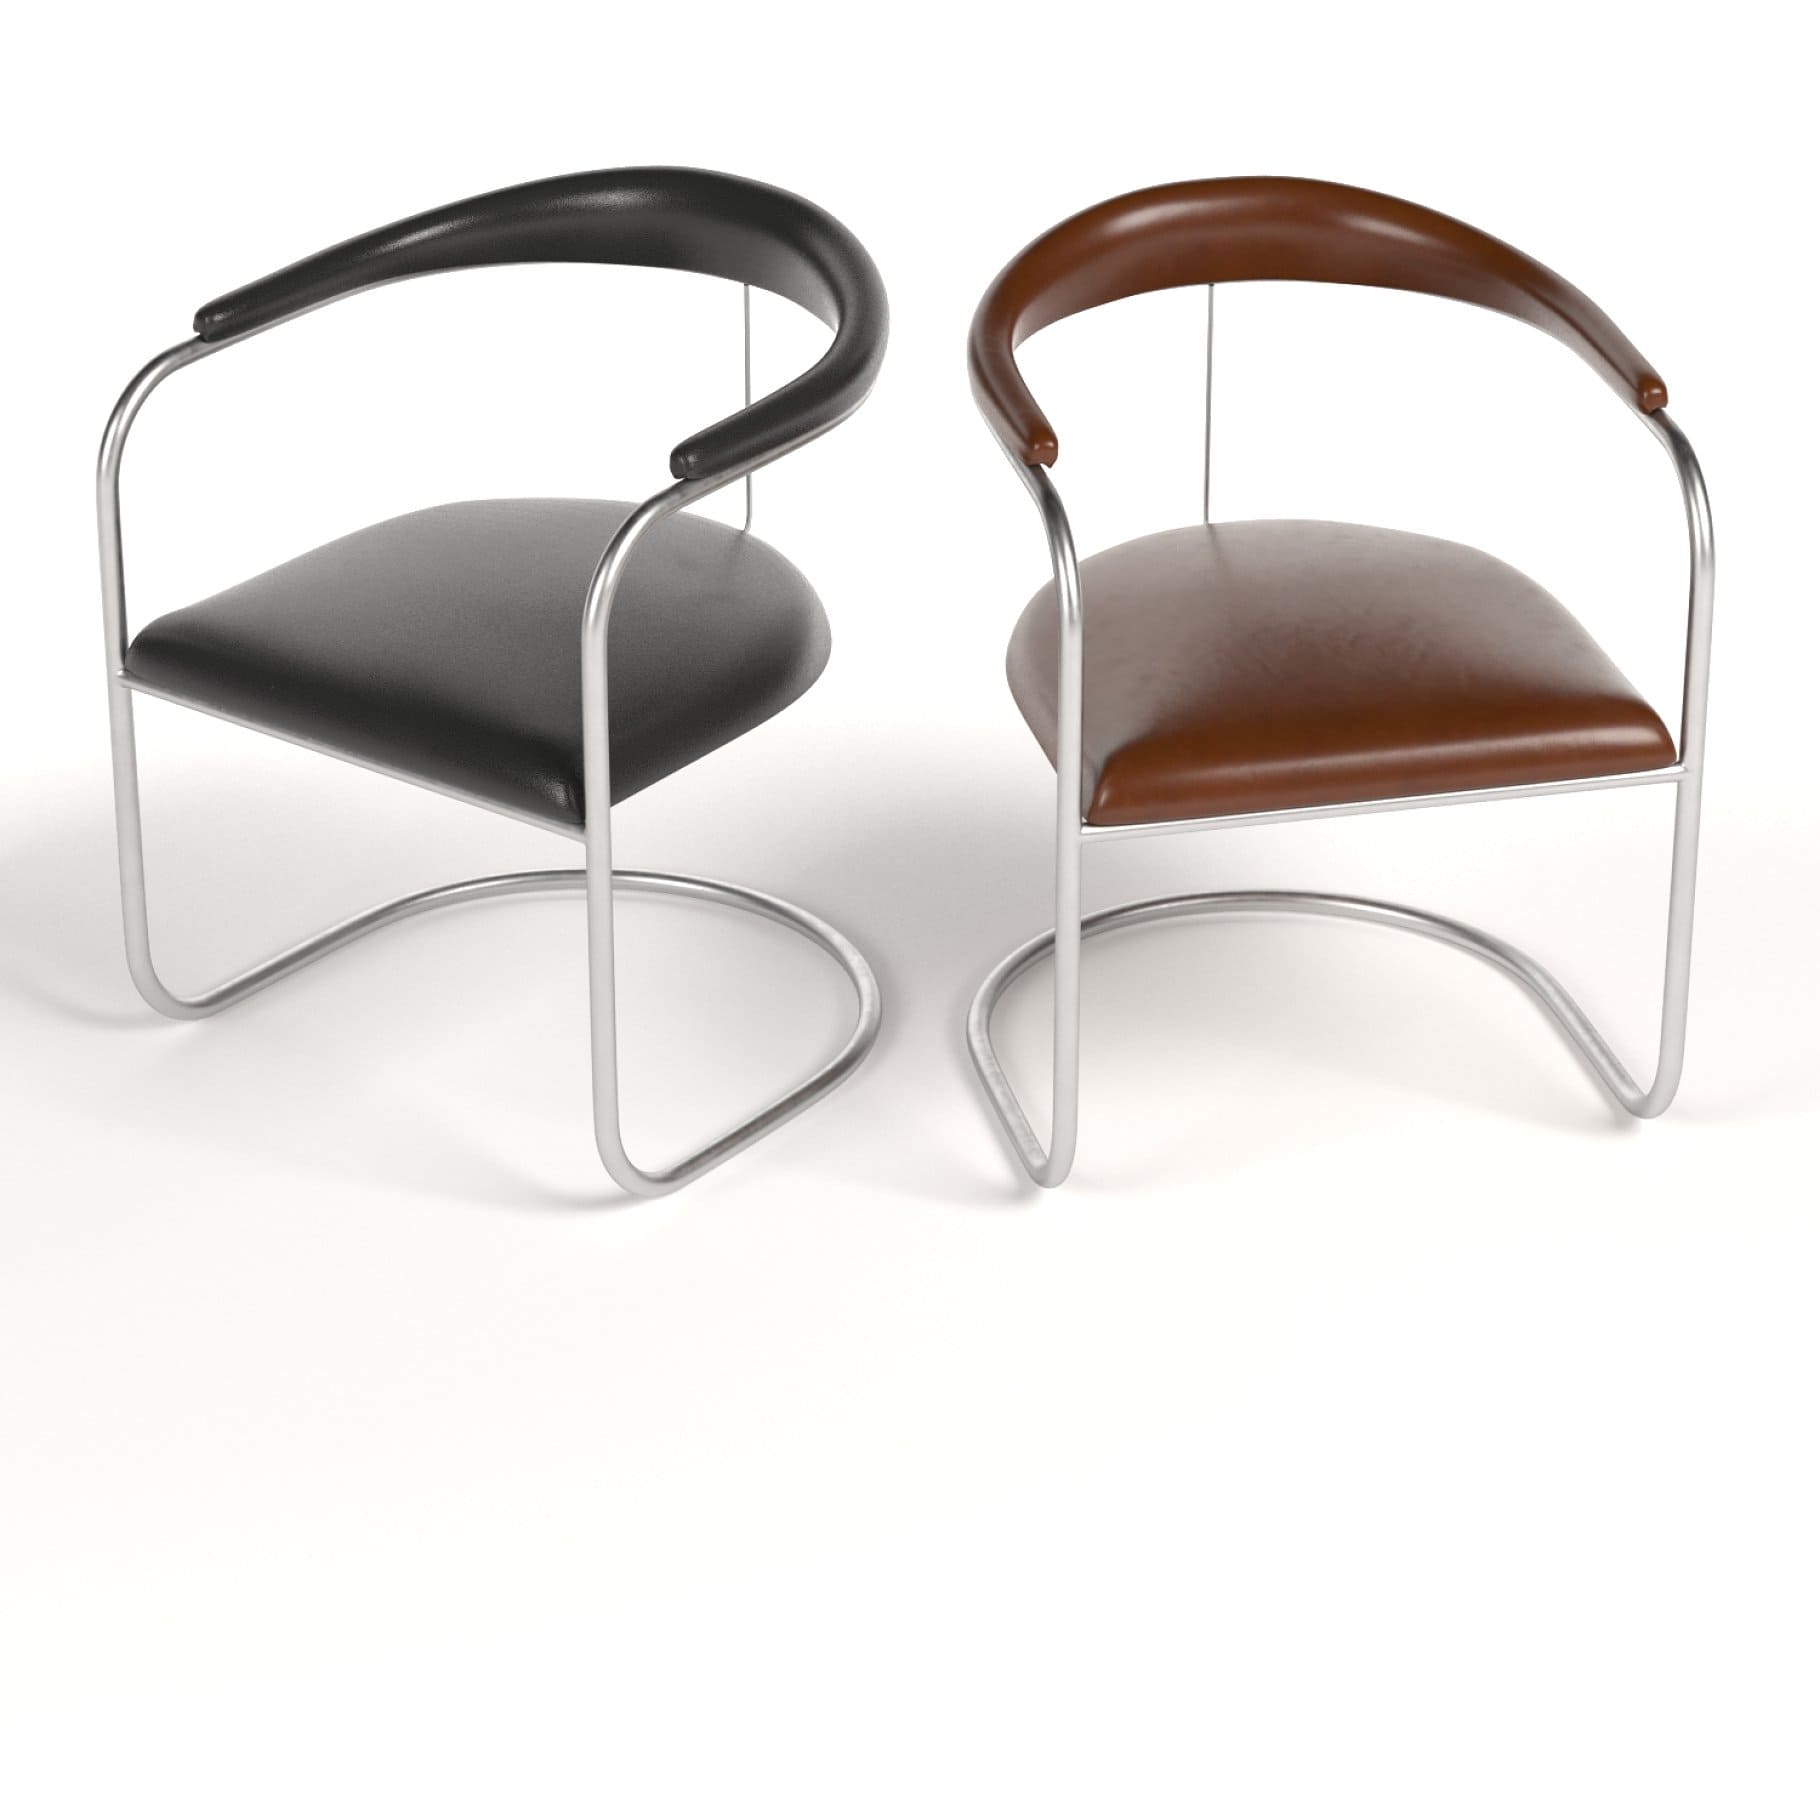 Two SS33 armchairs by Anton Lorenz in black and brown.